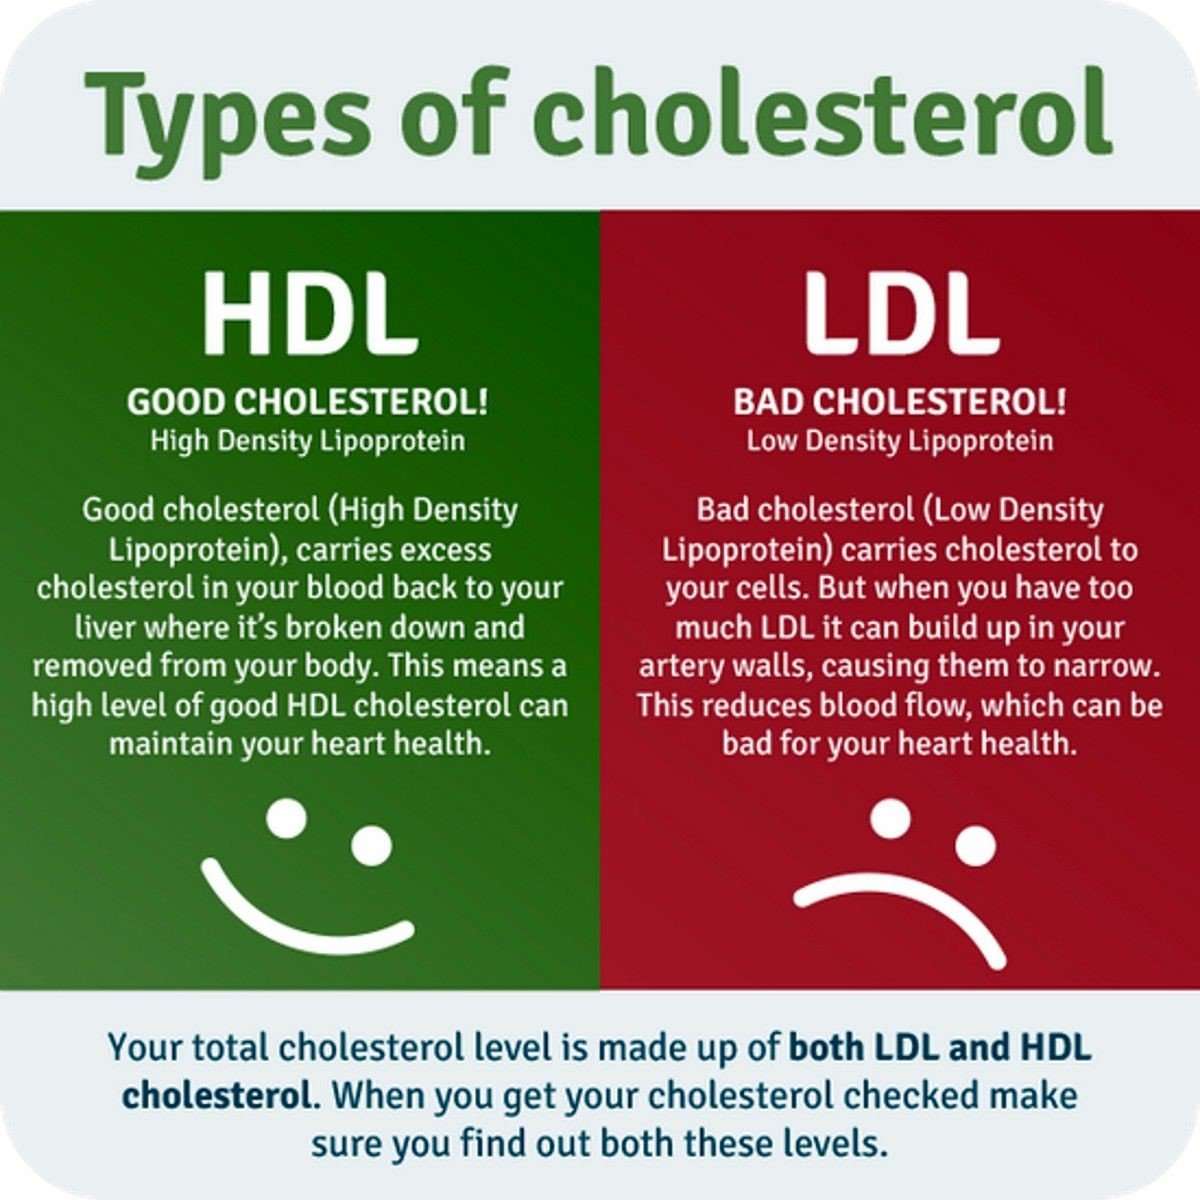 HEALTHY LIFE: New Cholesterol Guidelines Just Released ...